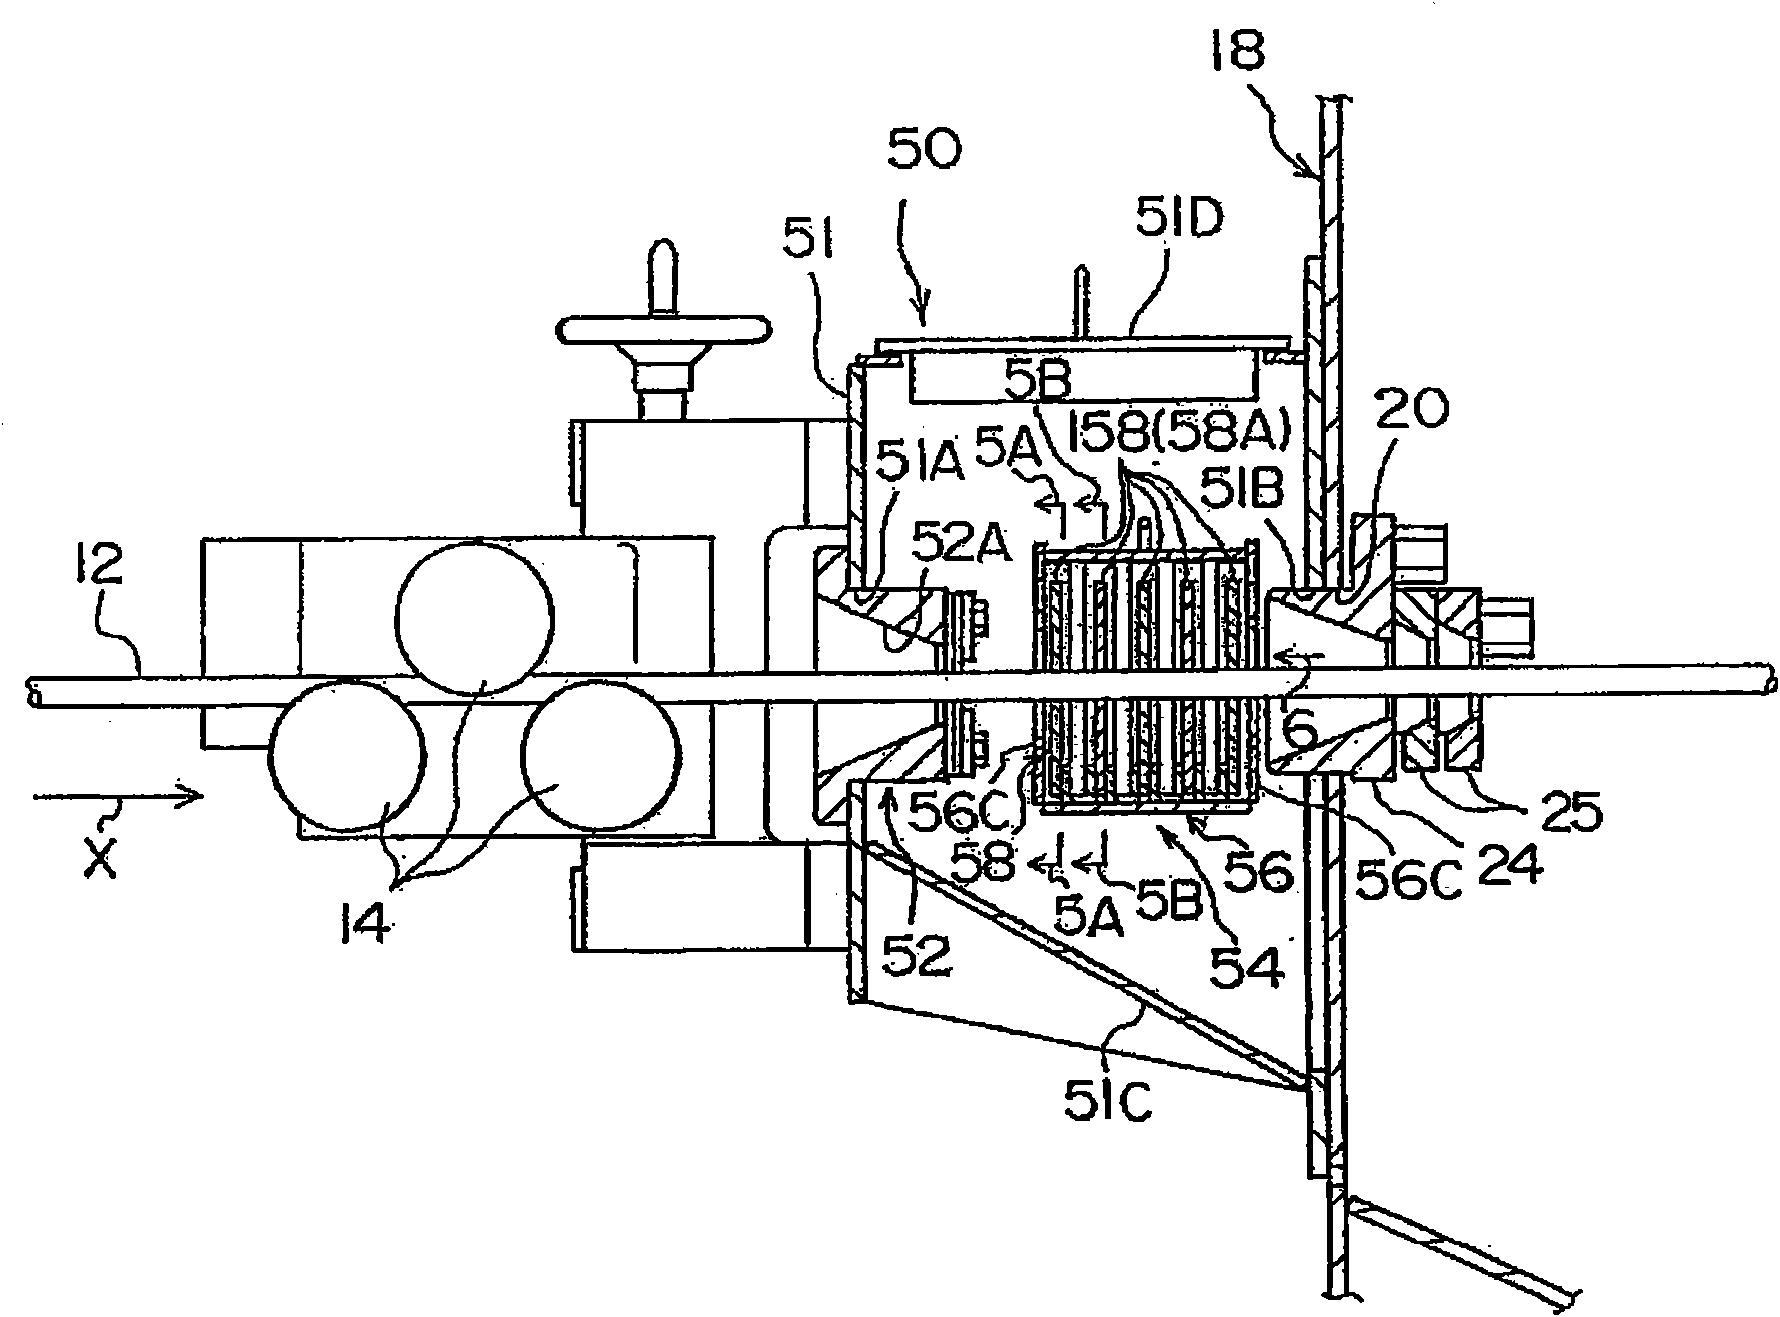 Surface treatment device